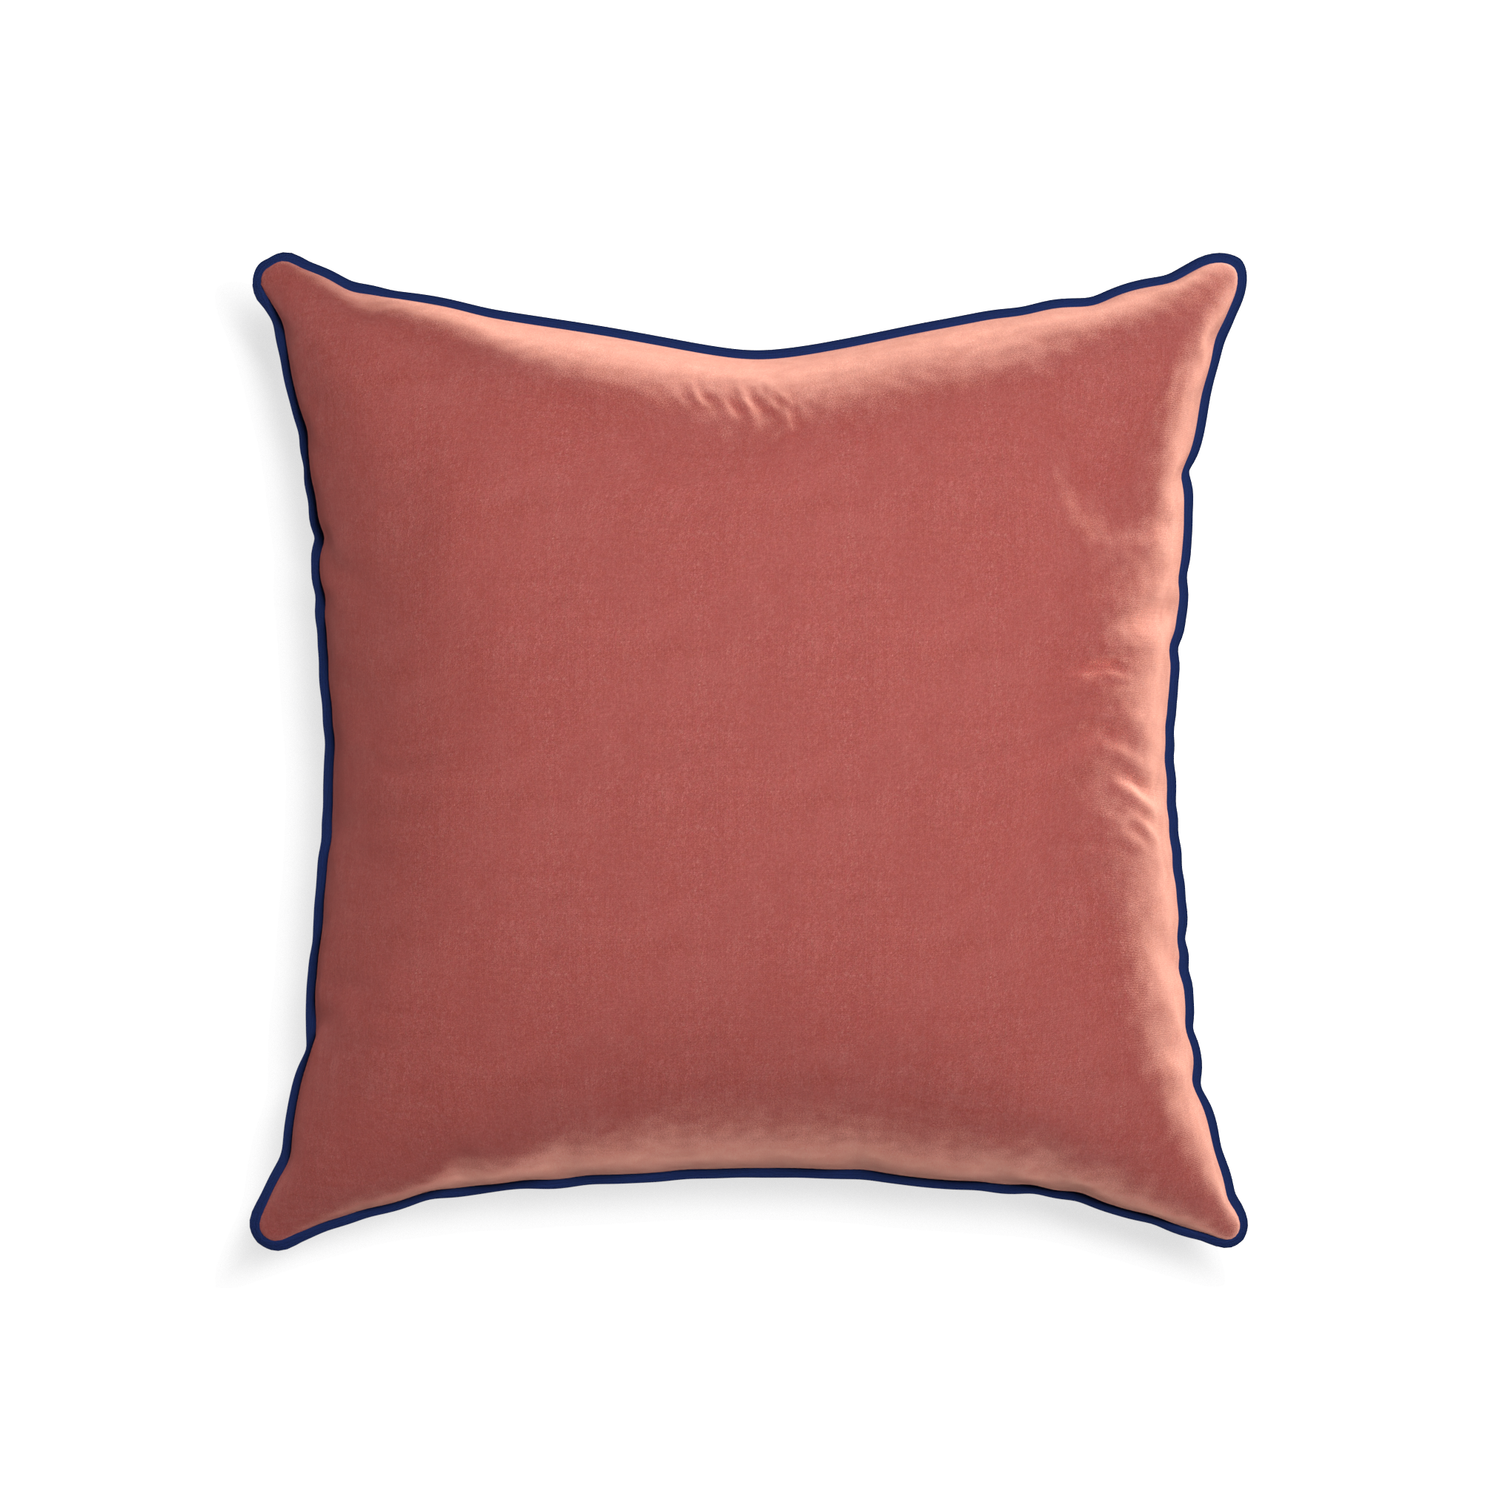 22-square cosmo velvet custom pillow with midnight piping on white background